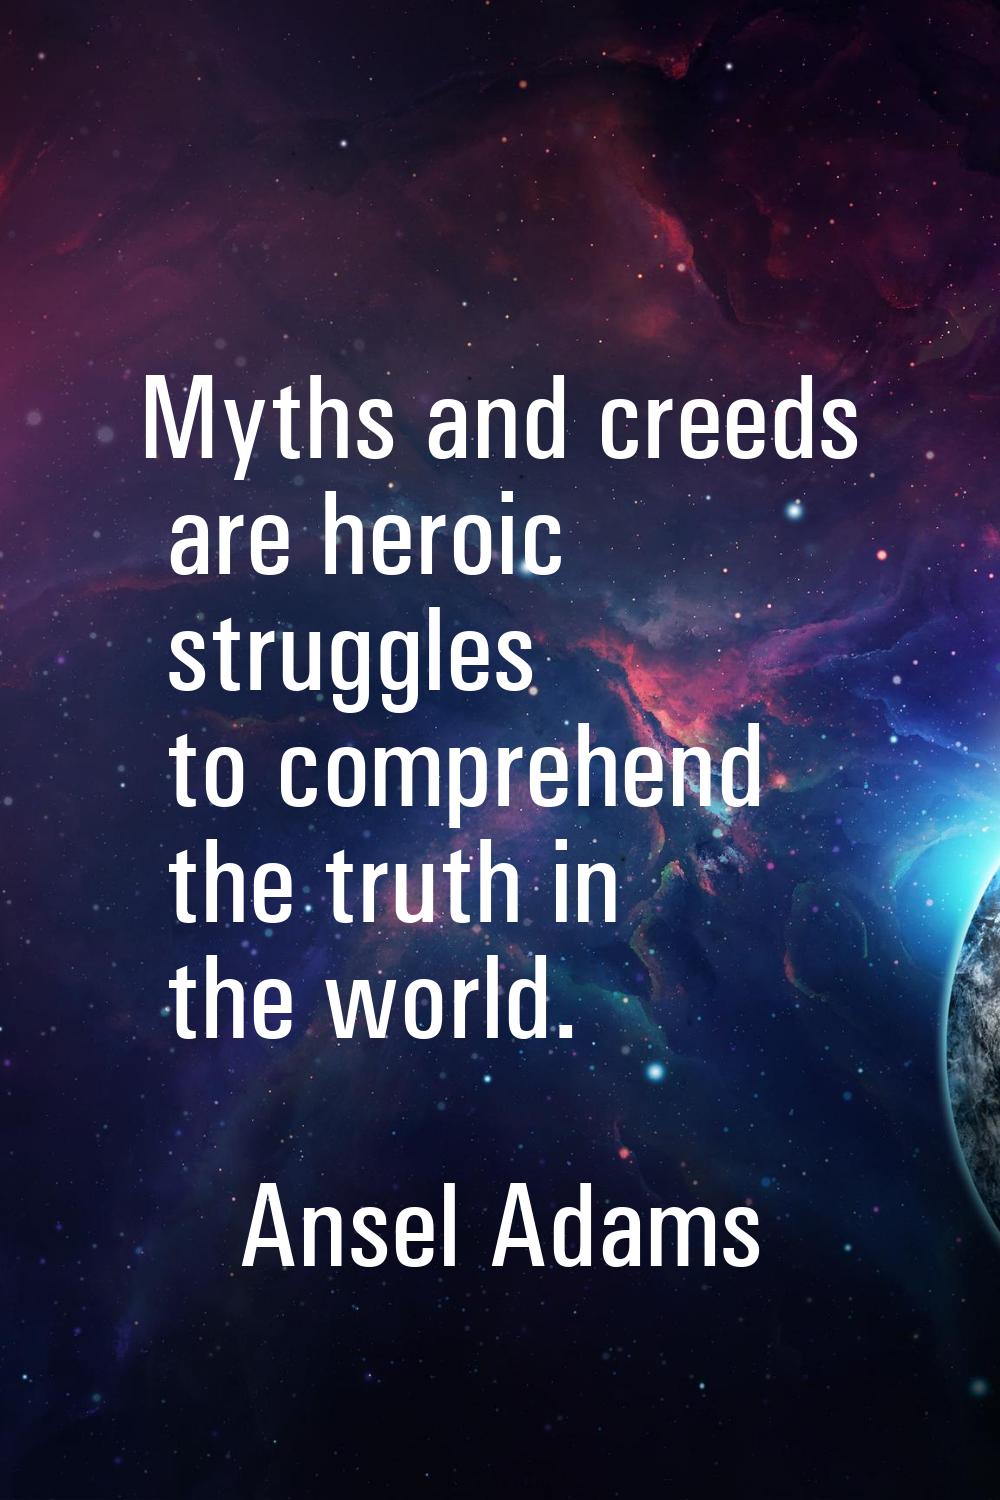 Myths and creeds are heroic struggles to comprehend the truth in the world.